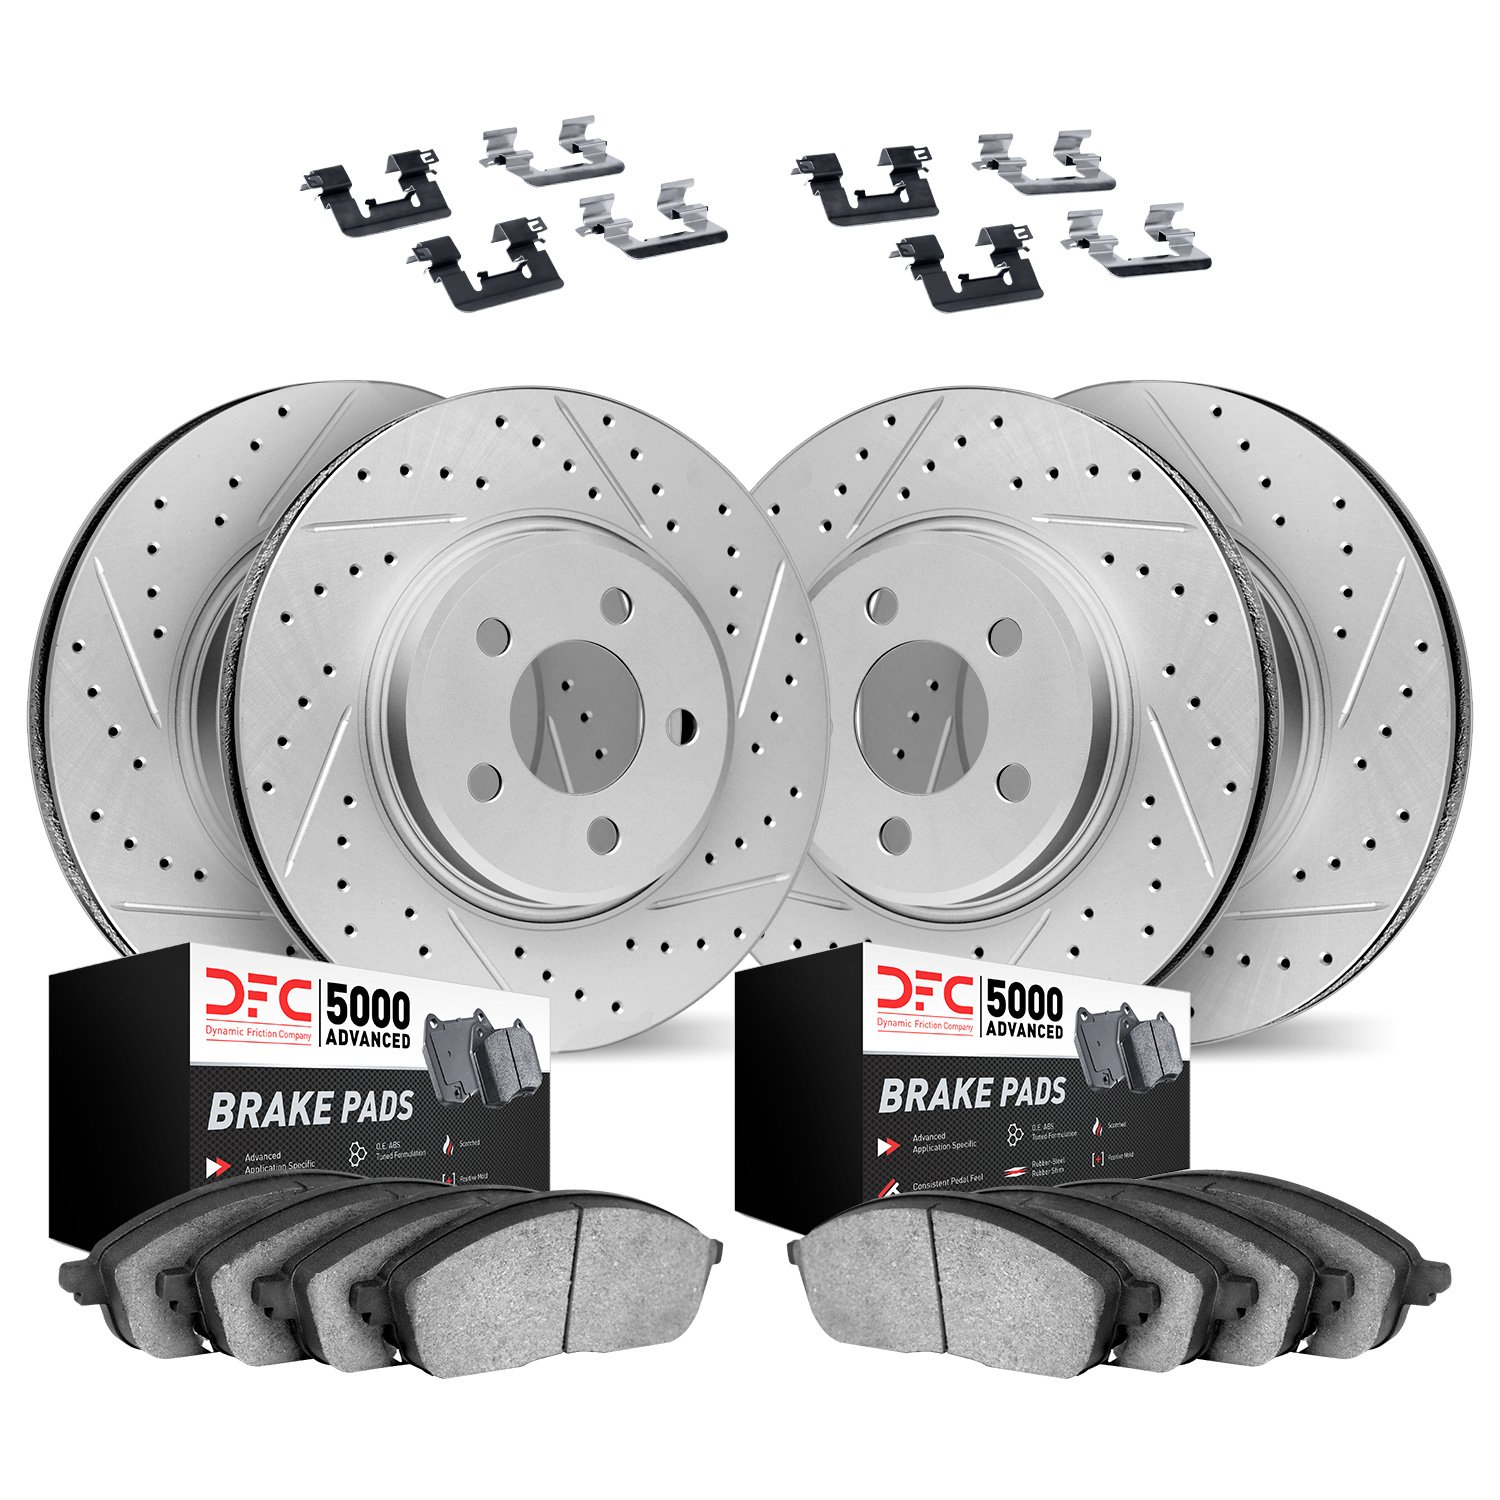 2514-40087 Geoperformance Drilled/Slotted Rotors w/5000 Advanced Brake Pads Kit & Hardware, 2006-2006 Mopar, Position: Front and